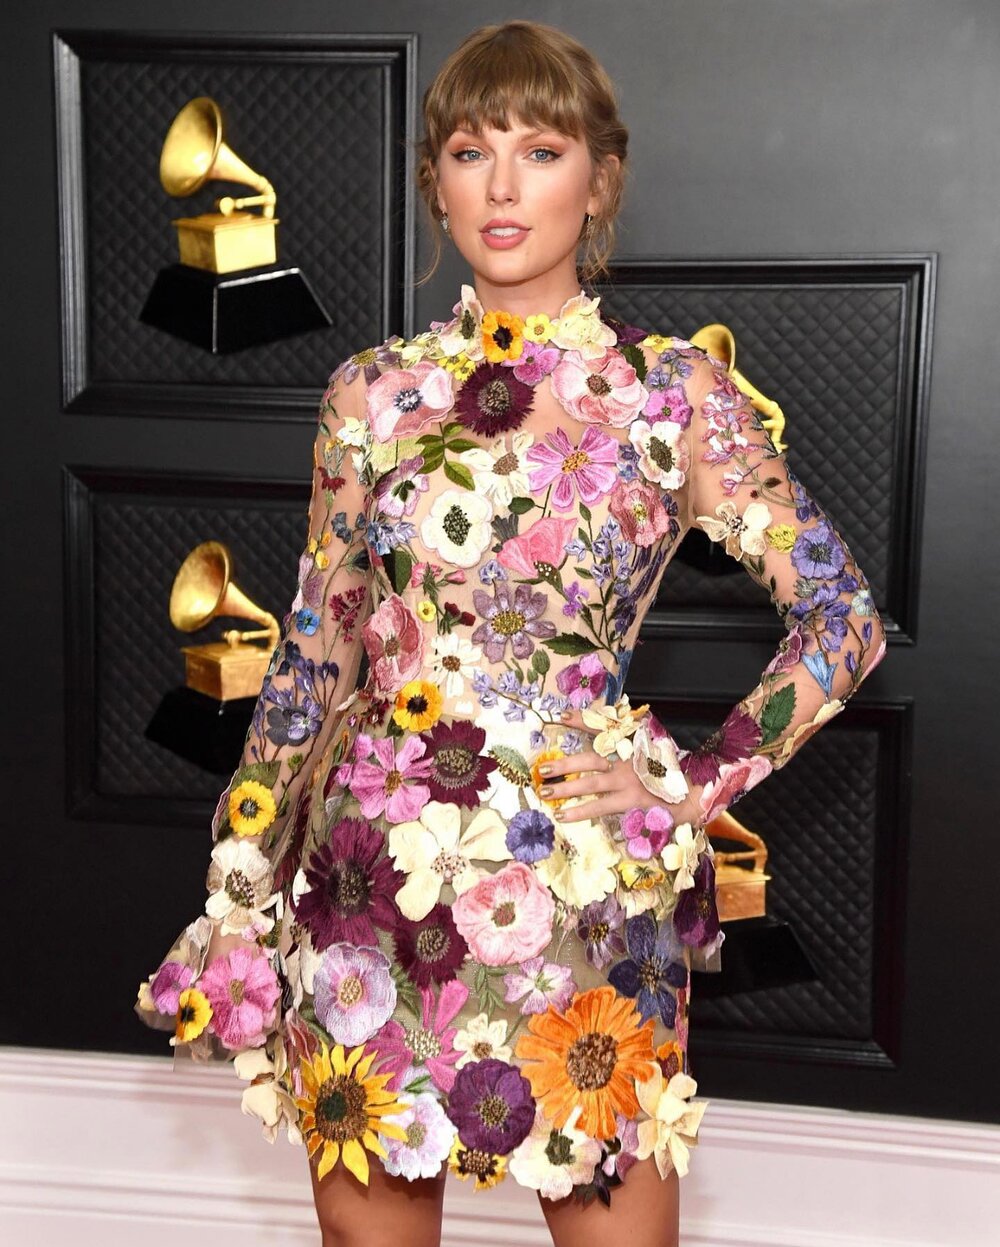 There were so many good fashion moments at last nights #Grammys but here are just a few of our favorites! Whose look did you love? #MakingitinManhattan